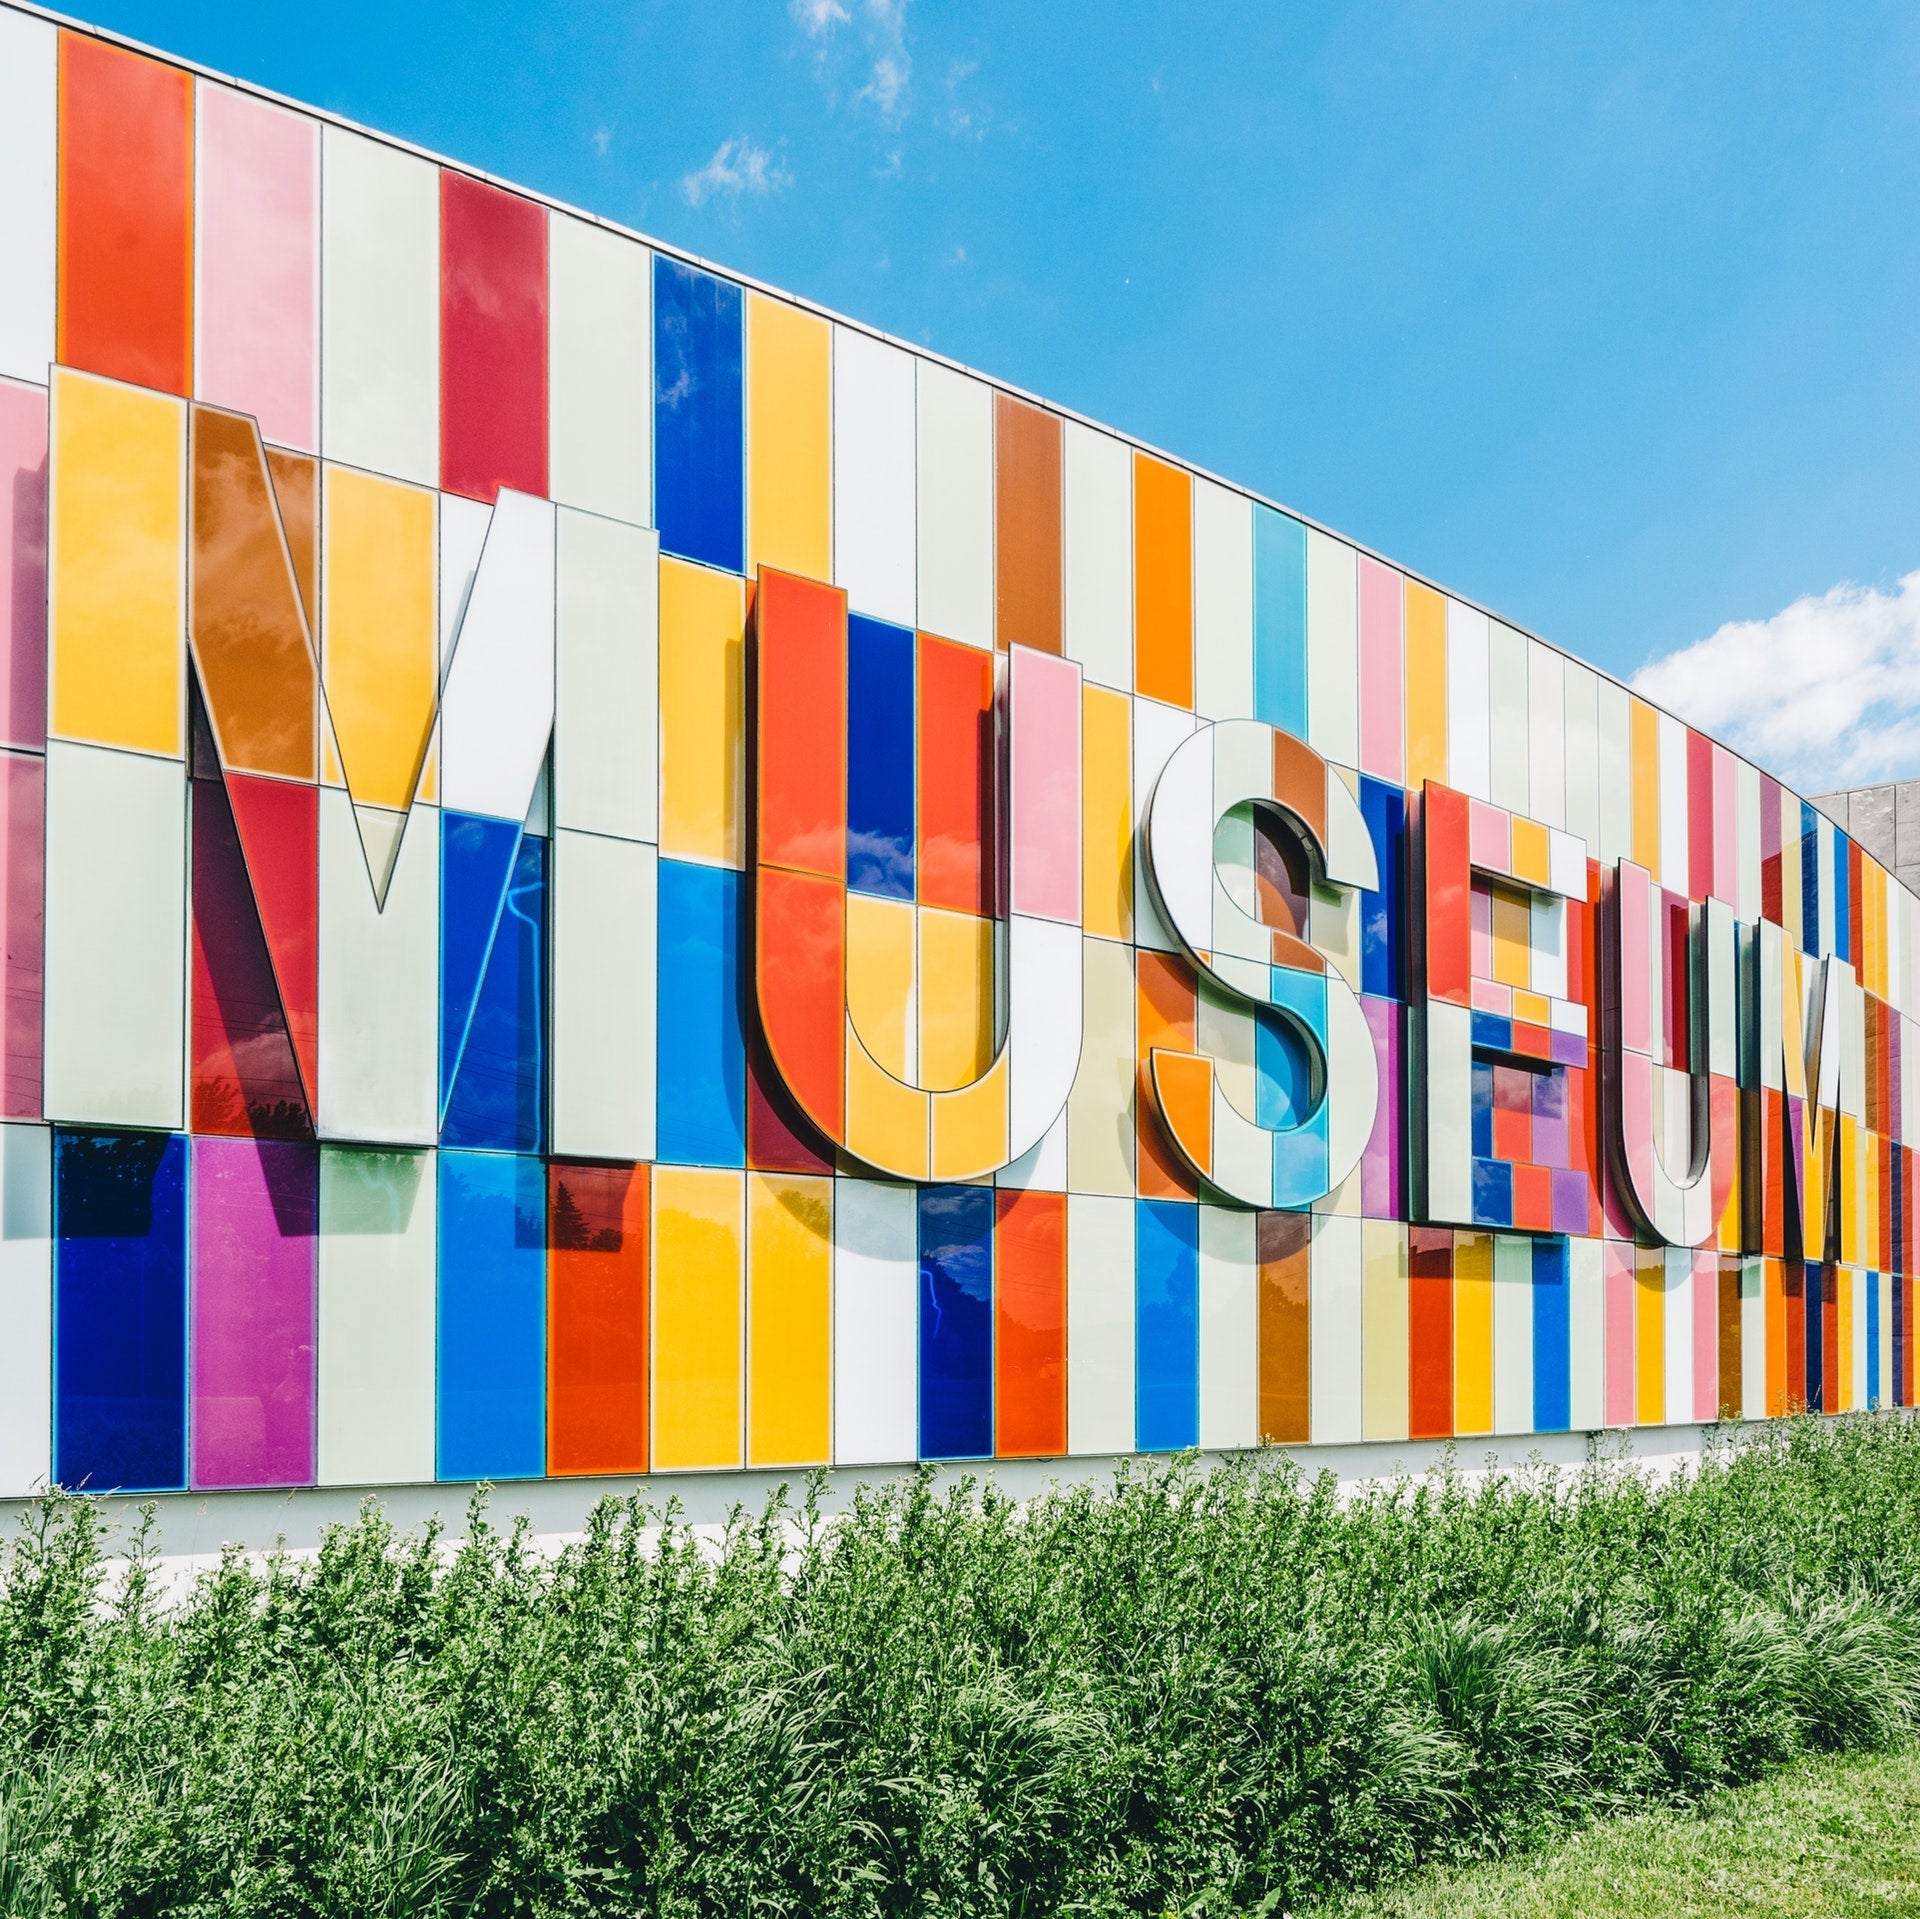 Guide to Latino & Hispanic Museums in the US - So You Can Celebrate Latino Culture & History - Mi LegaSi